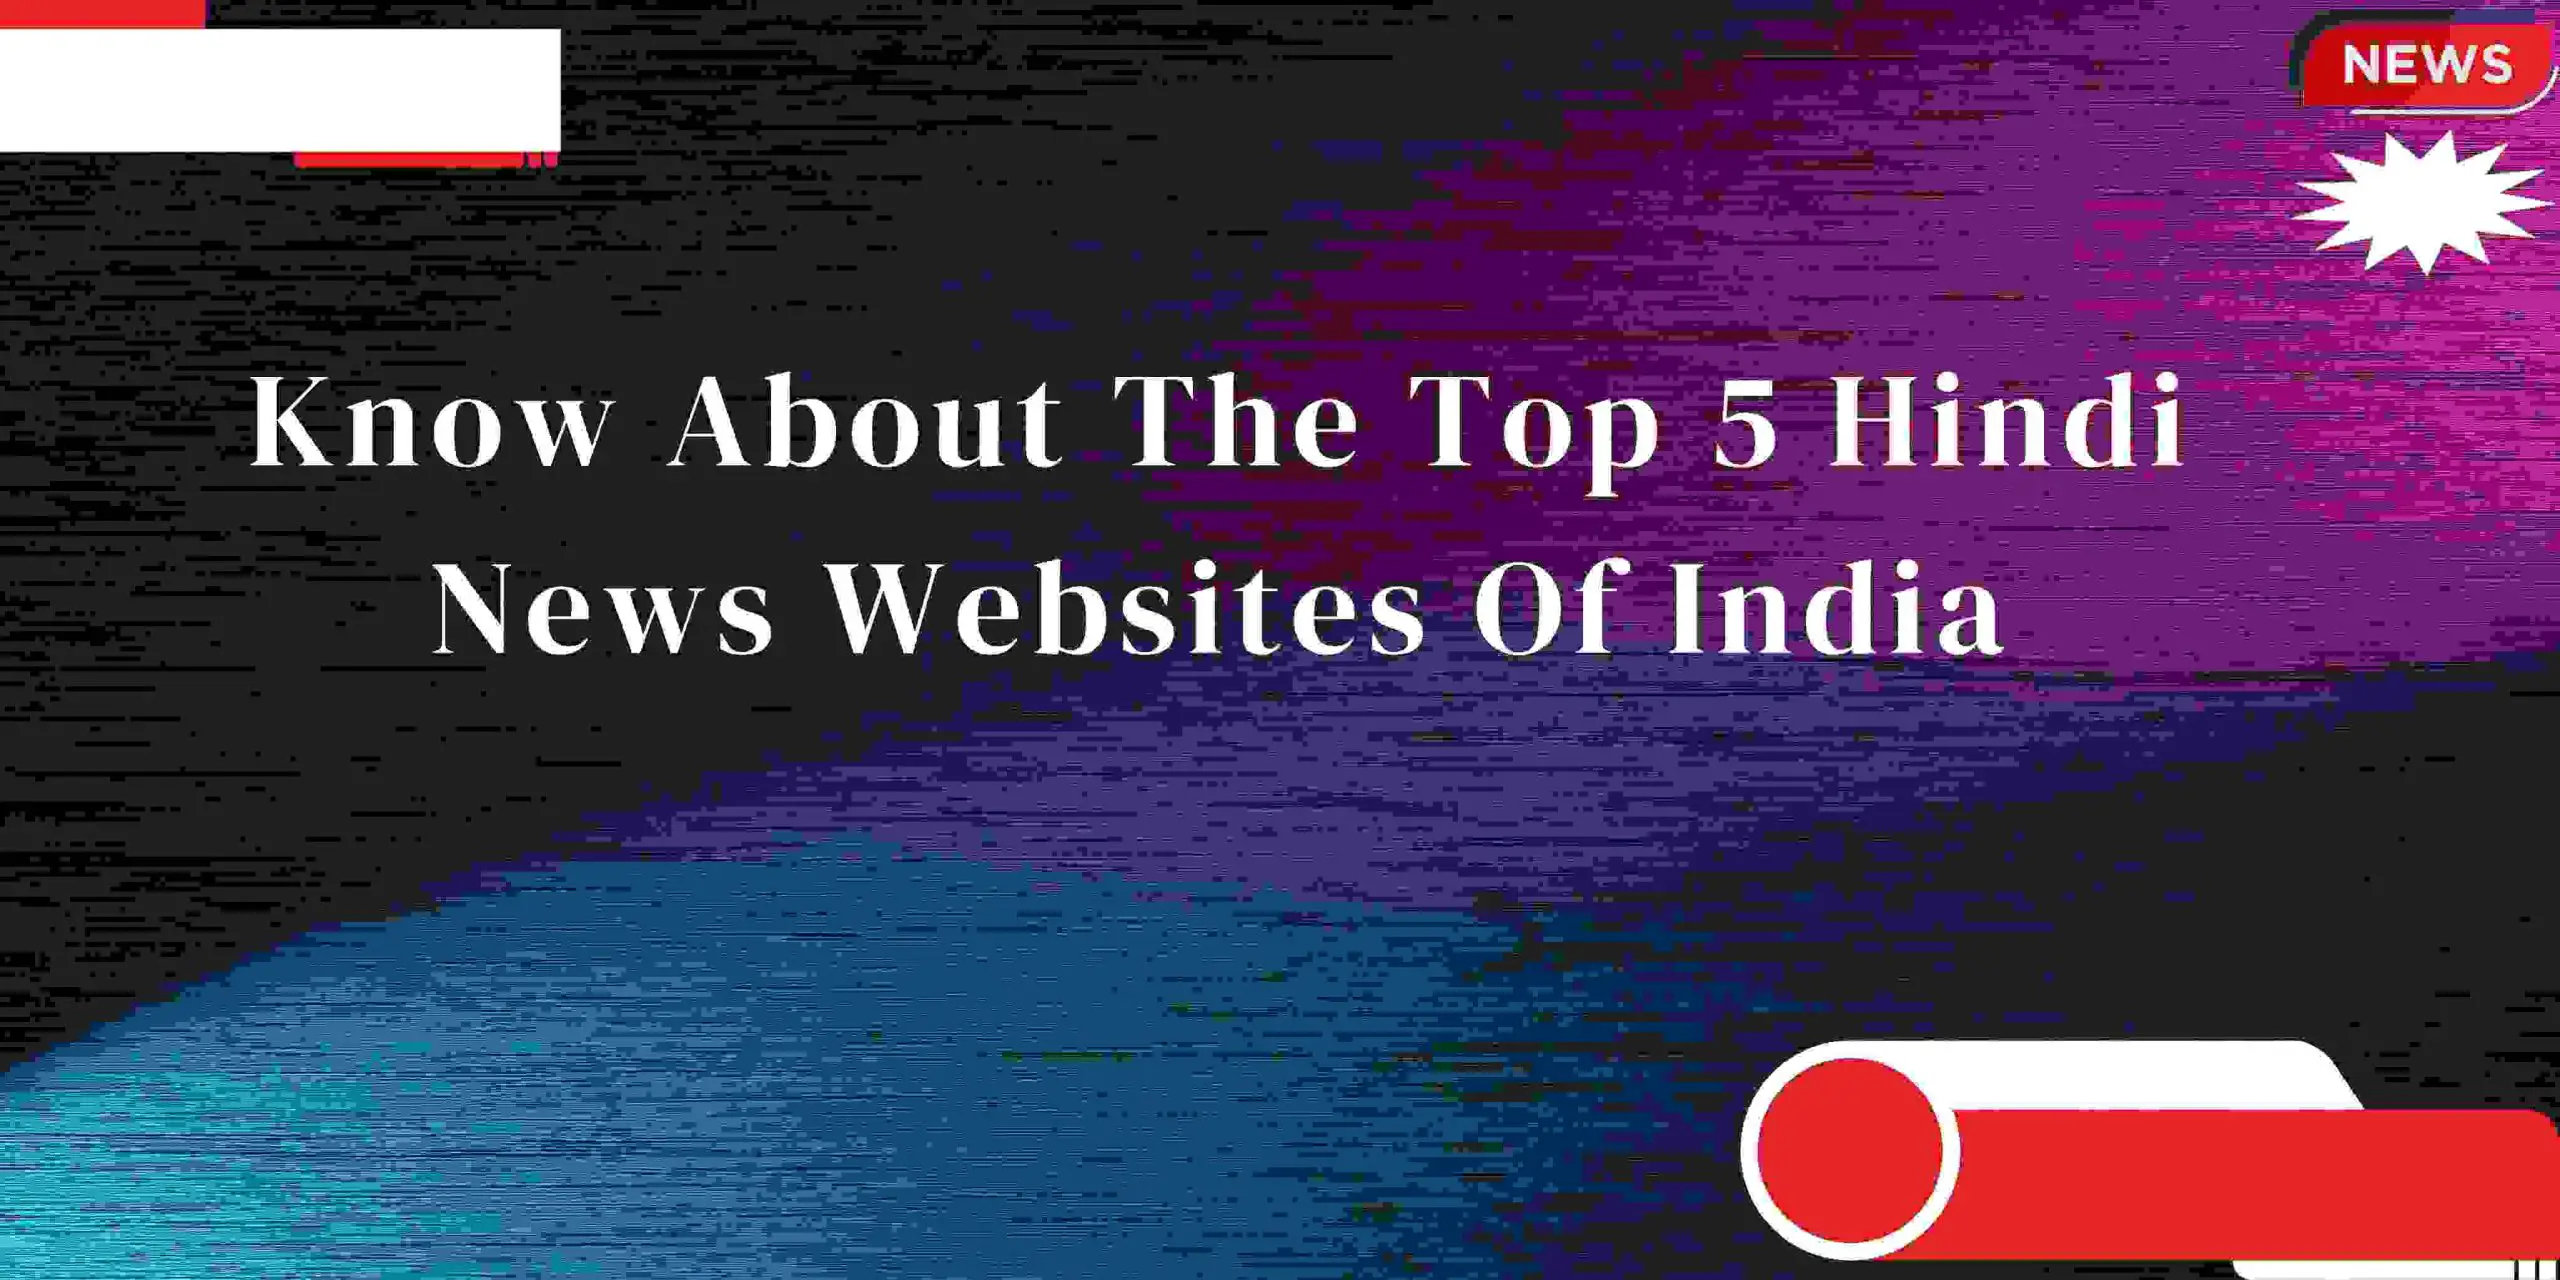 Know About The Top 5 Hindi News Websites Of India (1)